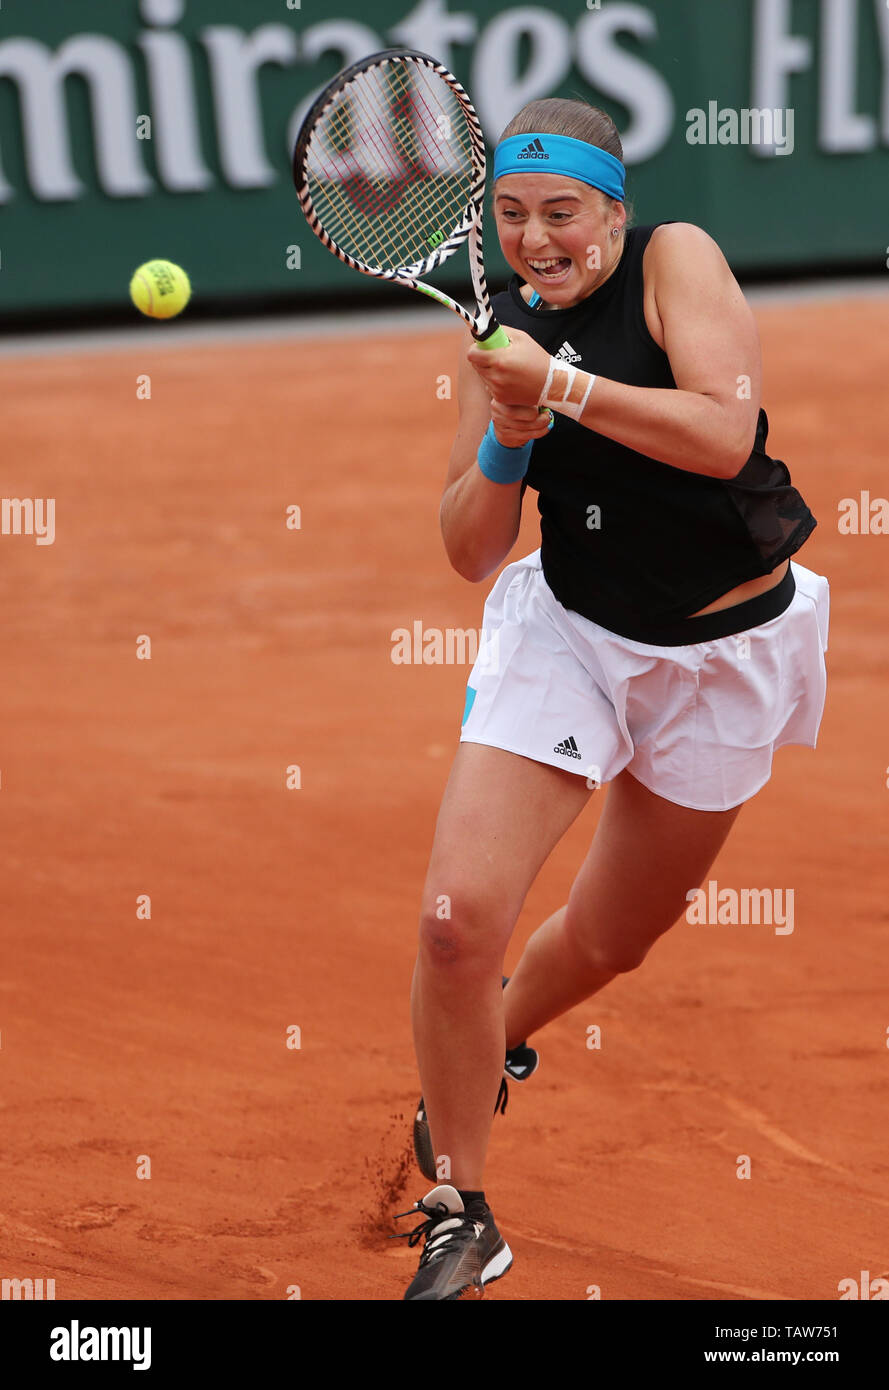 Paris. 28th May, 2019. Jelena Ostapenko of Latvia returns the ball during  the women's singles first round match with Victoria Azarenka of Belarus at French  Open tennis tournament 2019 at Roland Garros